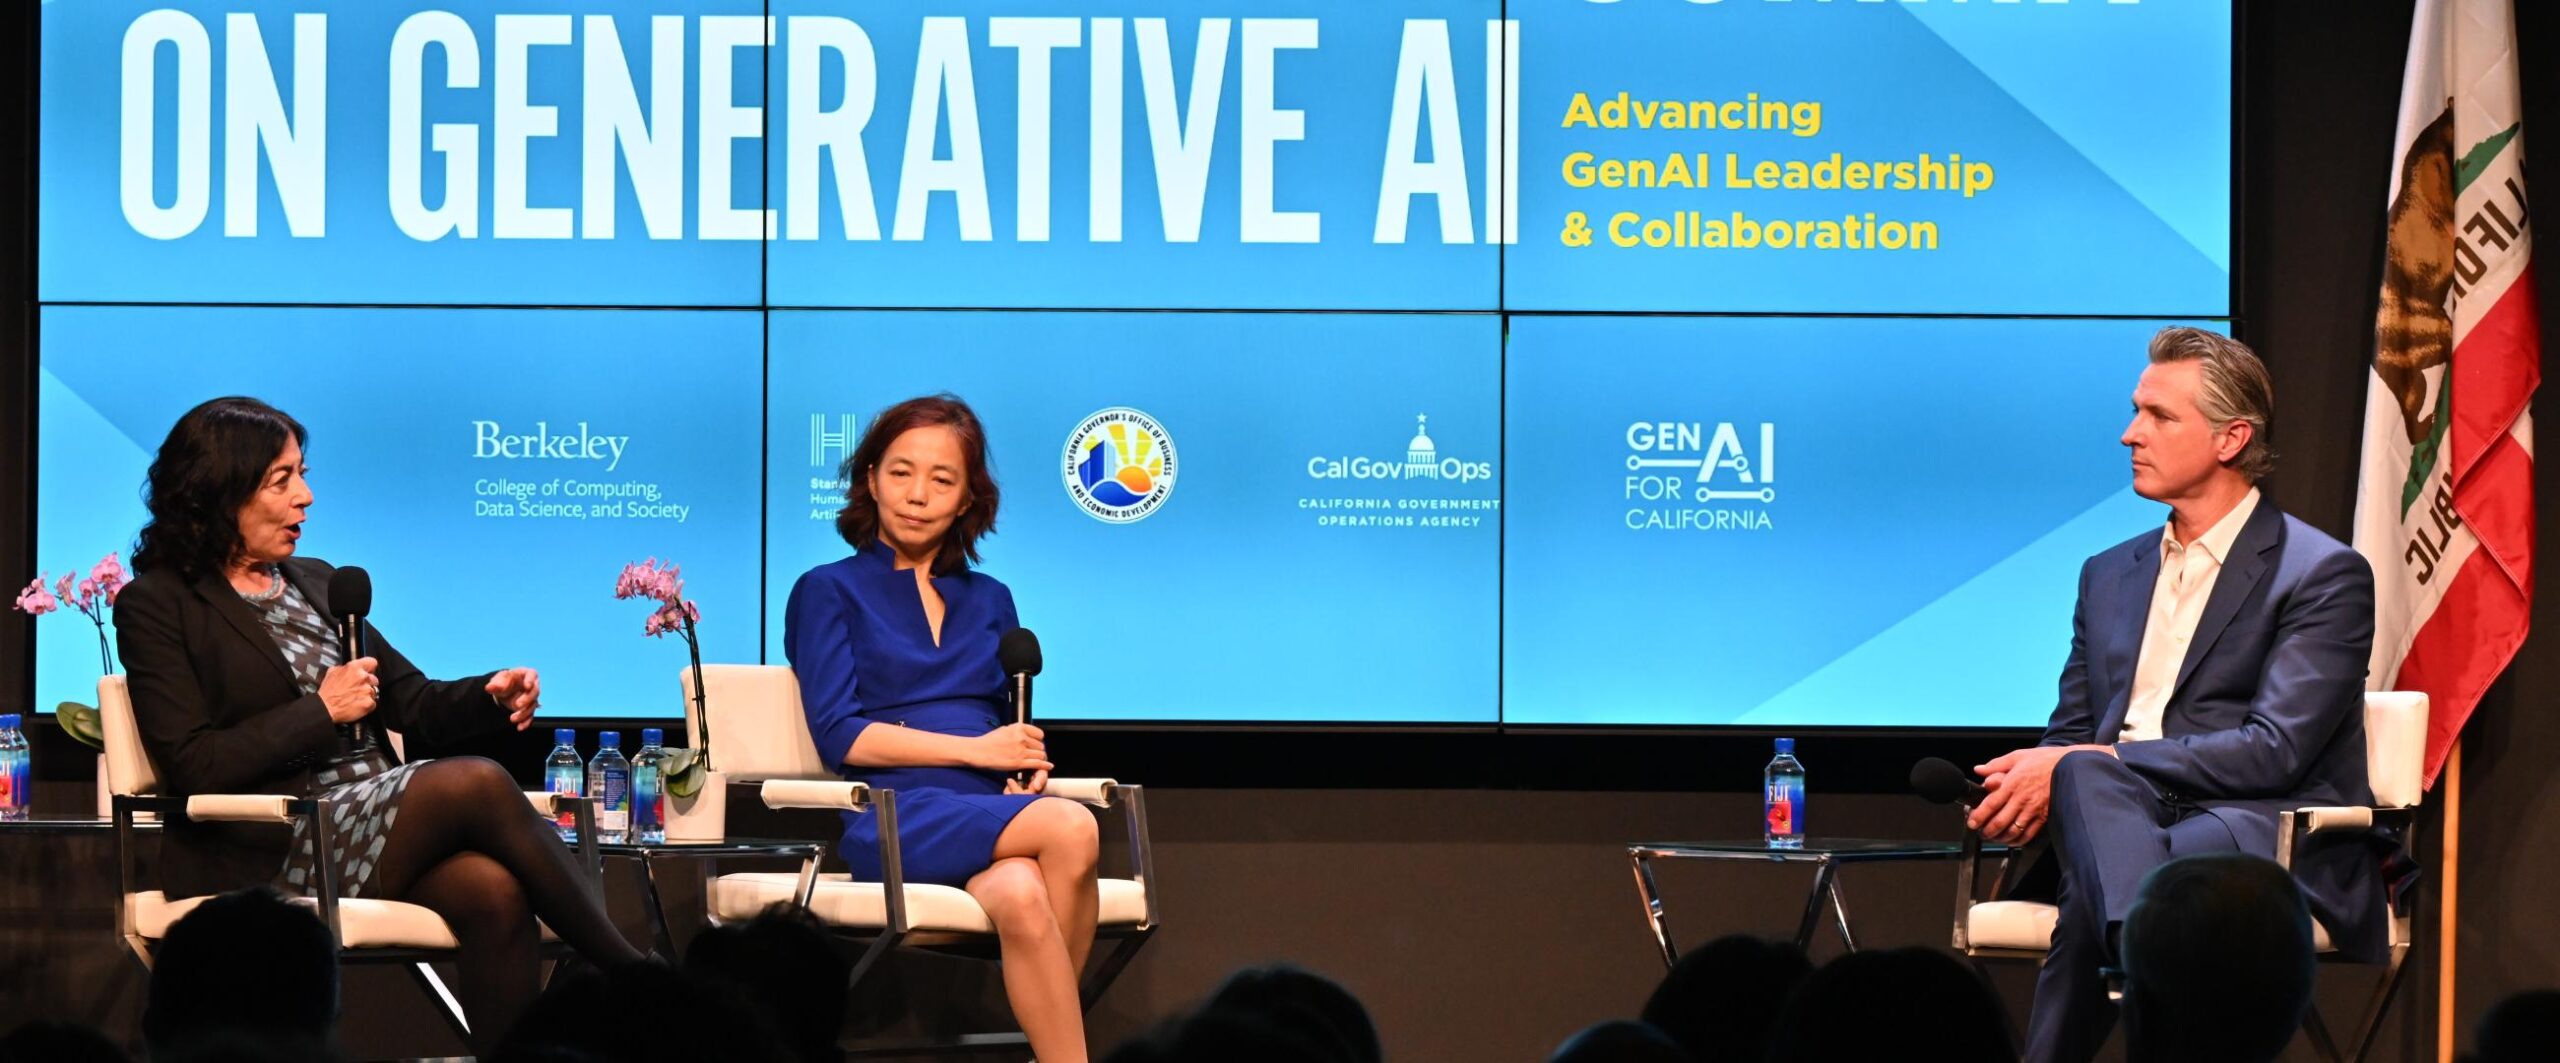 California Gov. Gavin Newsom speaks with UC Berkeley College of Computing, Data Science, and Society Jennifer Chayes and Stanford Institute for Human-Centered Artificial Intelligence Co-Director Fei-Fei Li about artificial intelligence on stage.